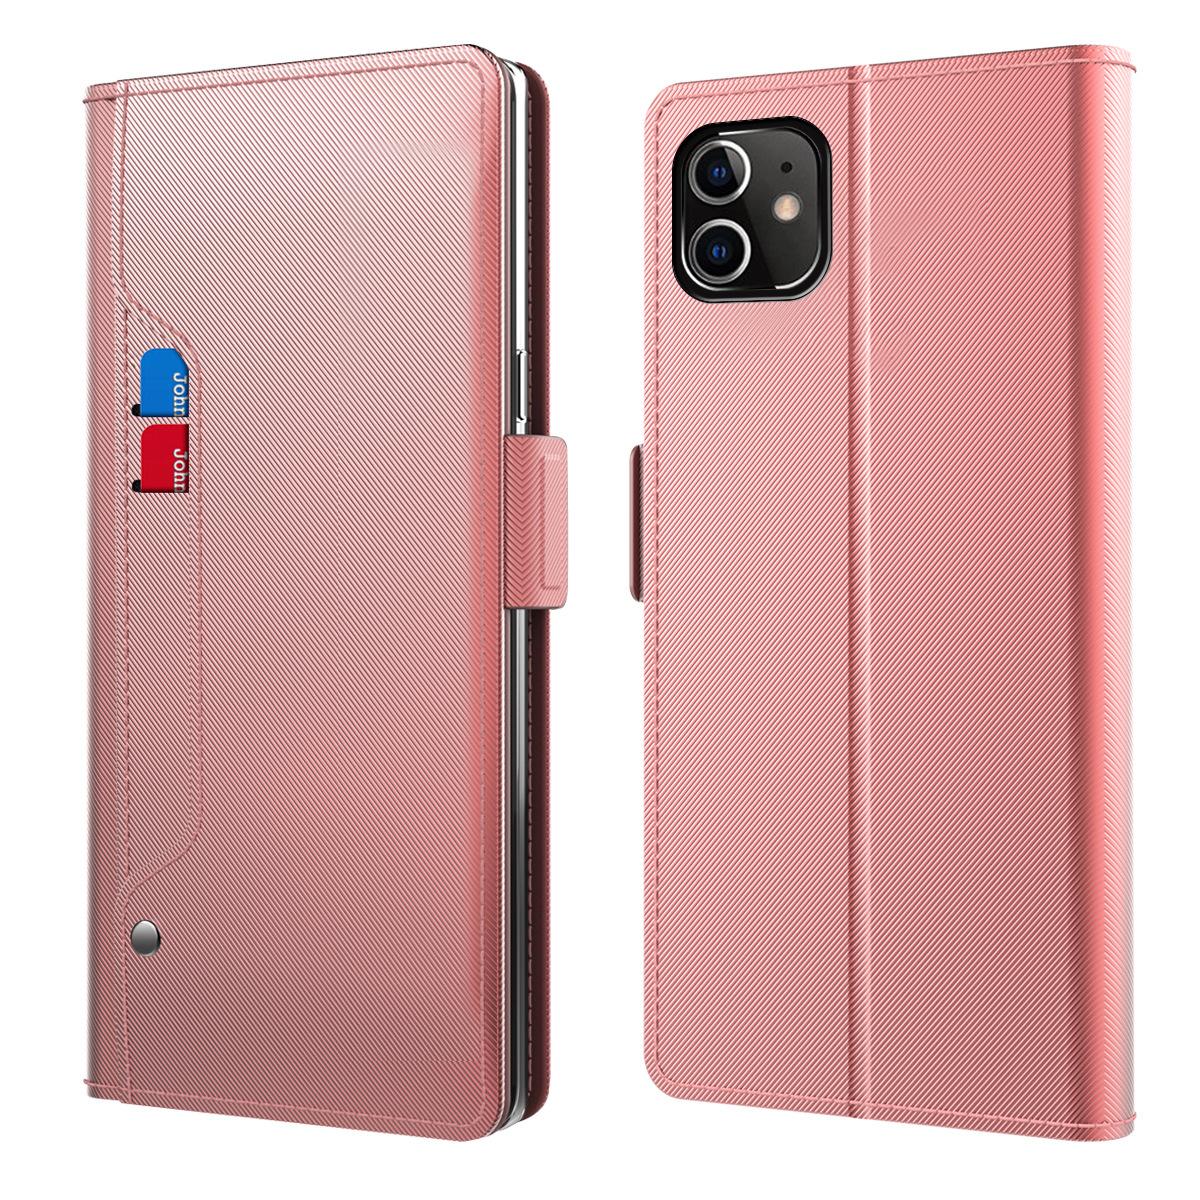 iPhone 12 Mini Wallet Case Mirror Pink Gold